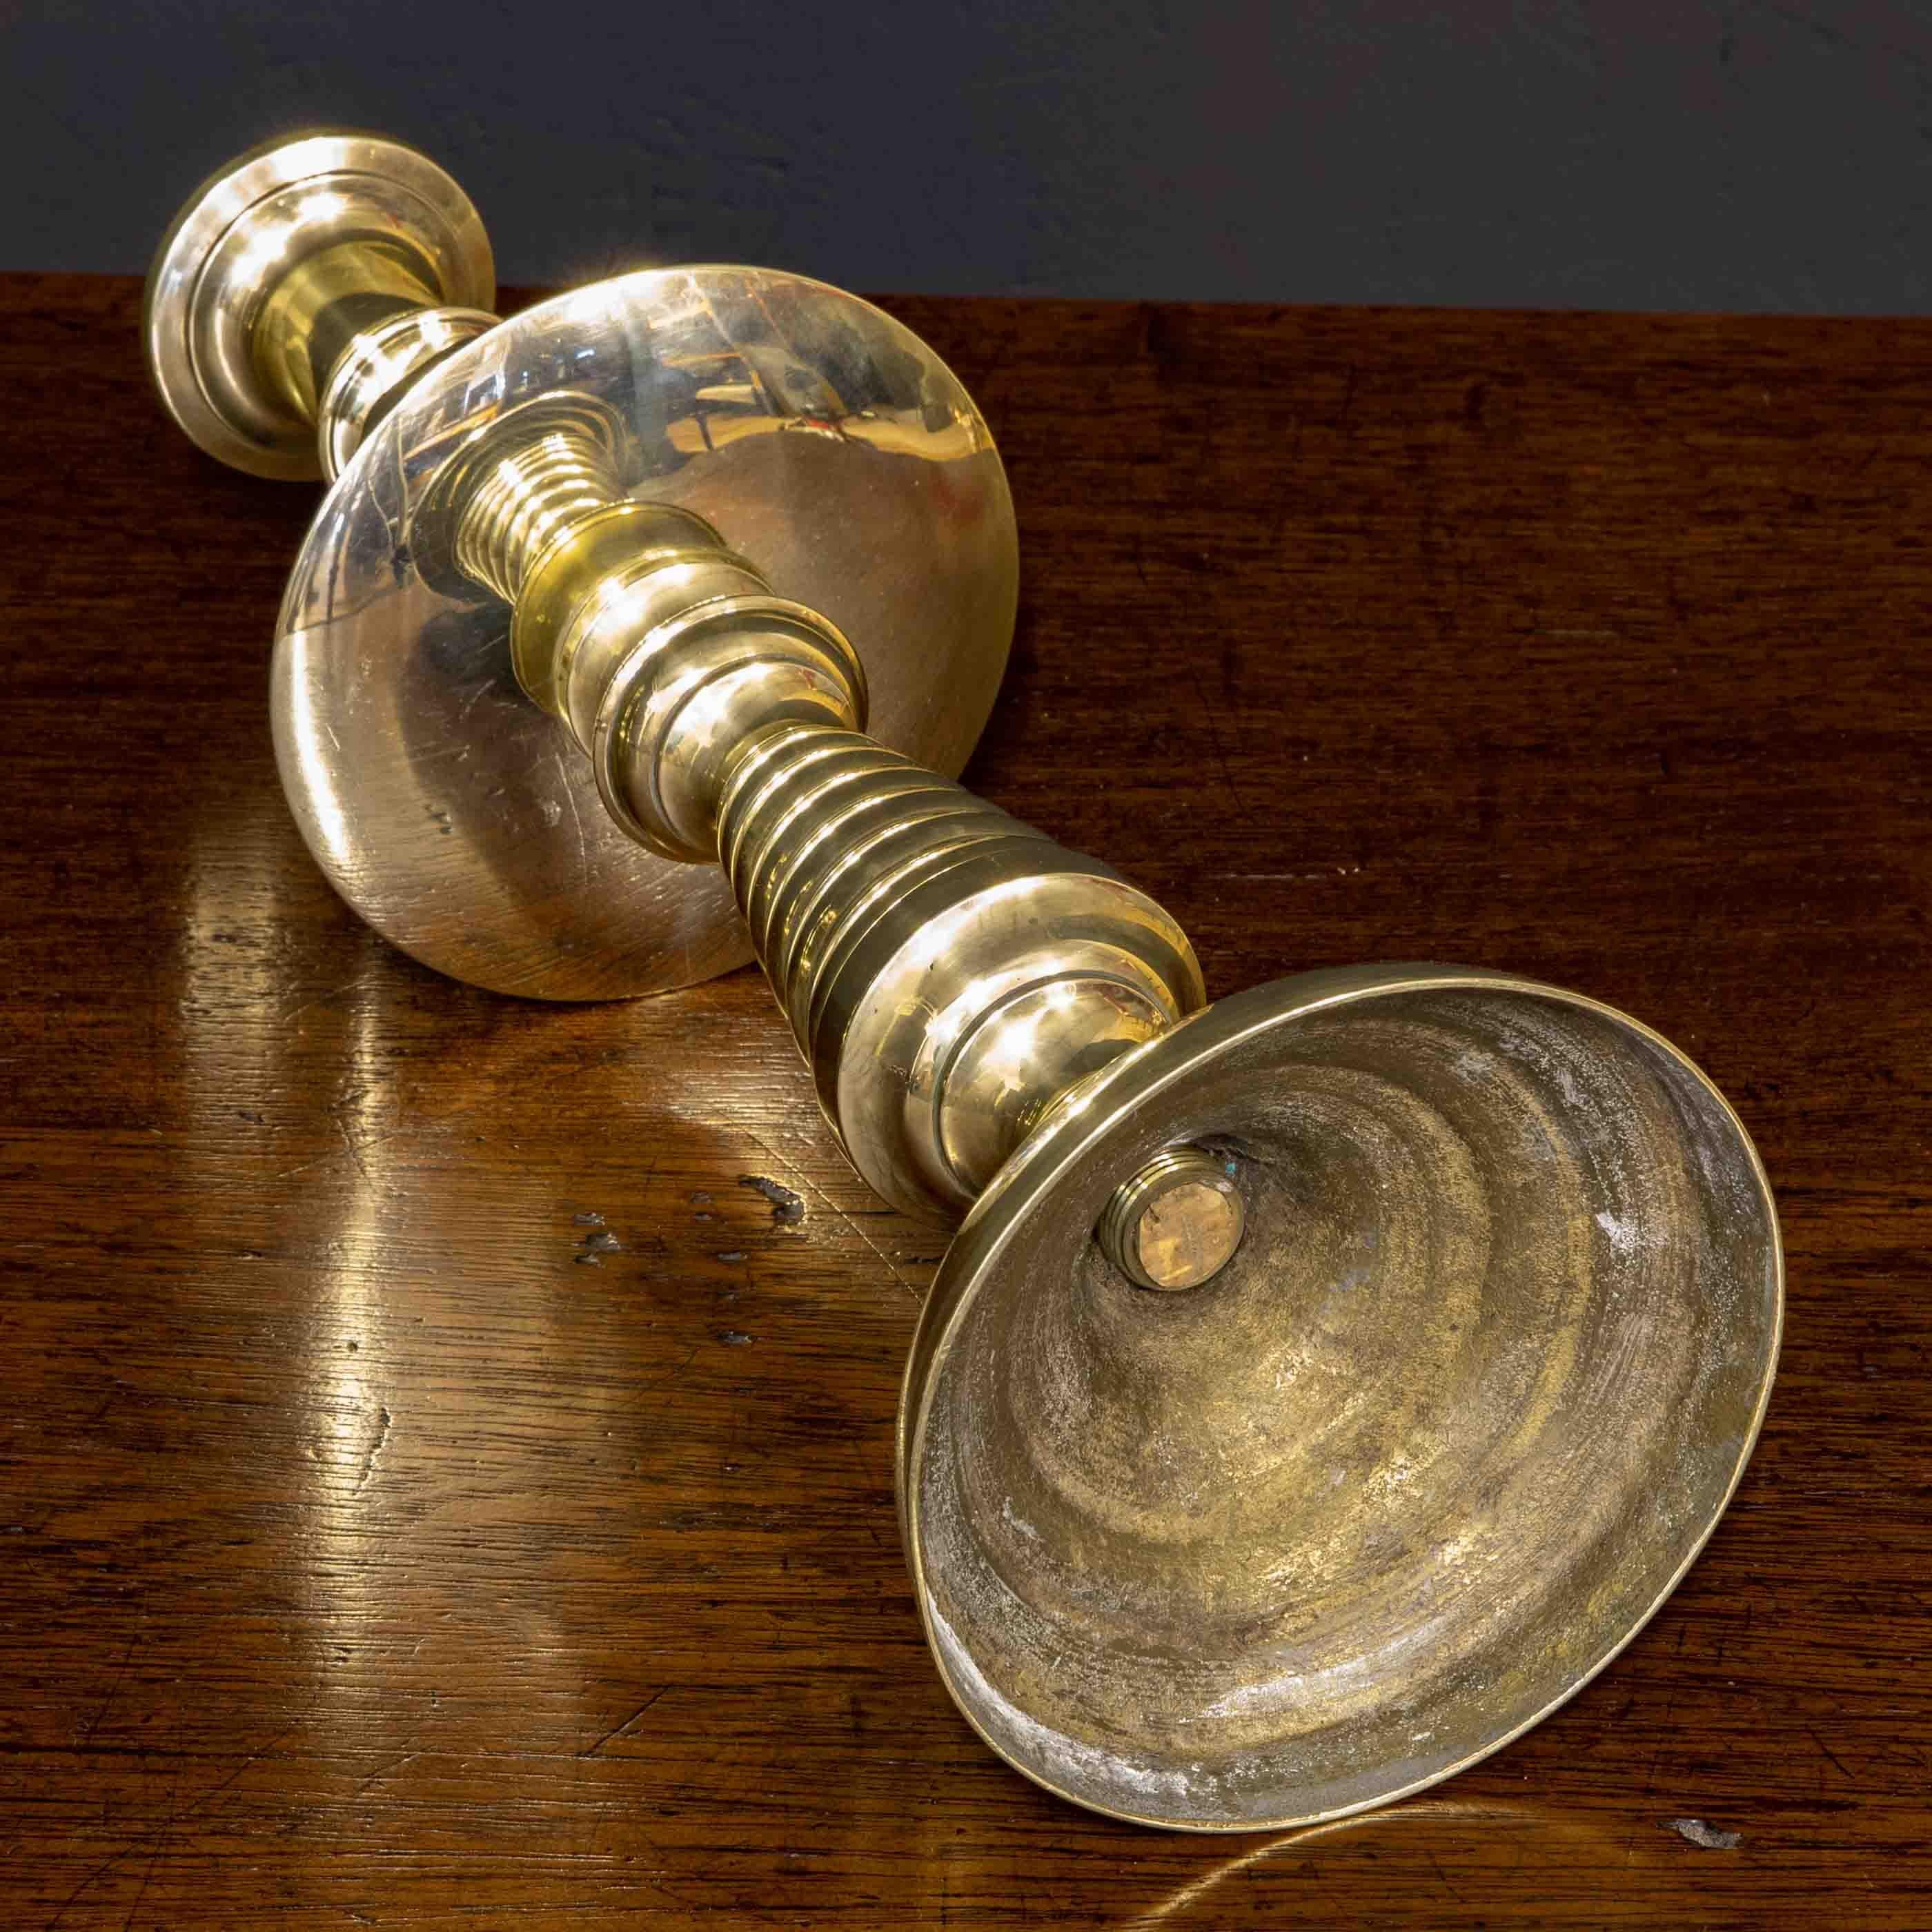 An extremely rare suite of four Victorian brass candlesticks. The round bases give way to a beehive center section and then on to a 6 inch drip tray which in turn leads to a diamond faceted section and upper fixed candle sconce. In excellent